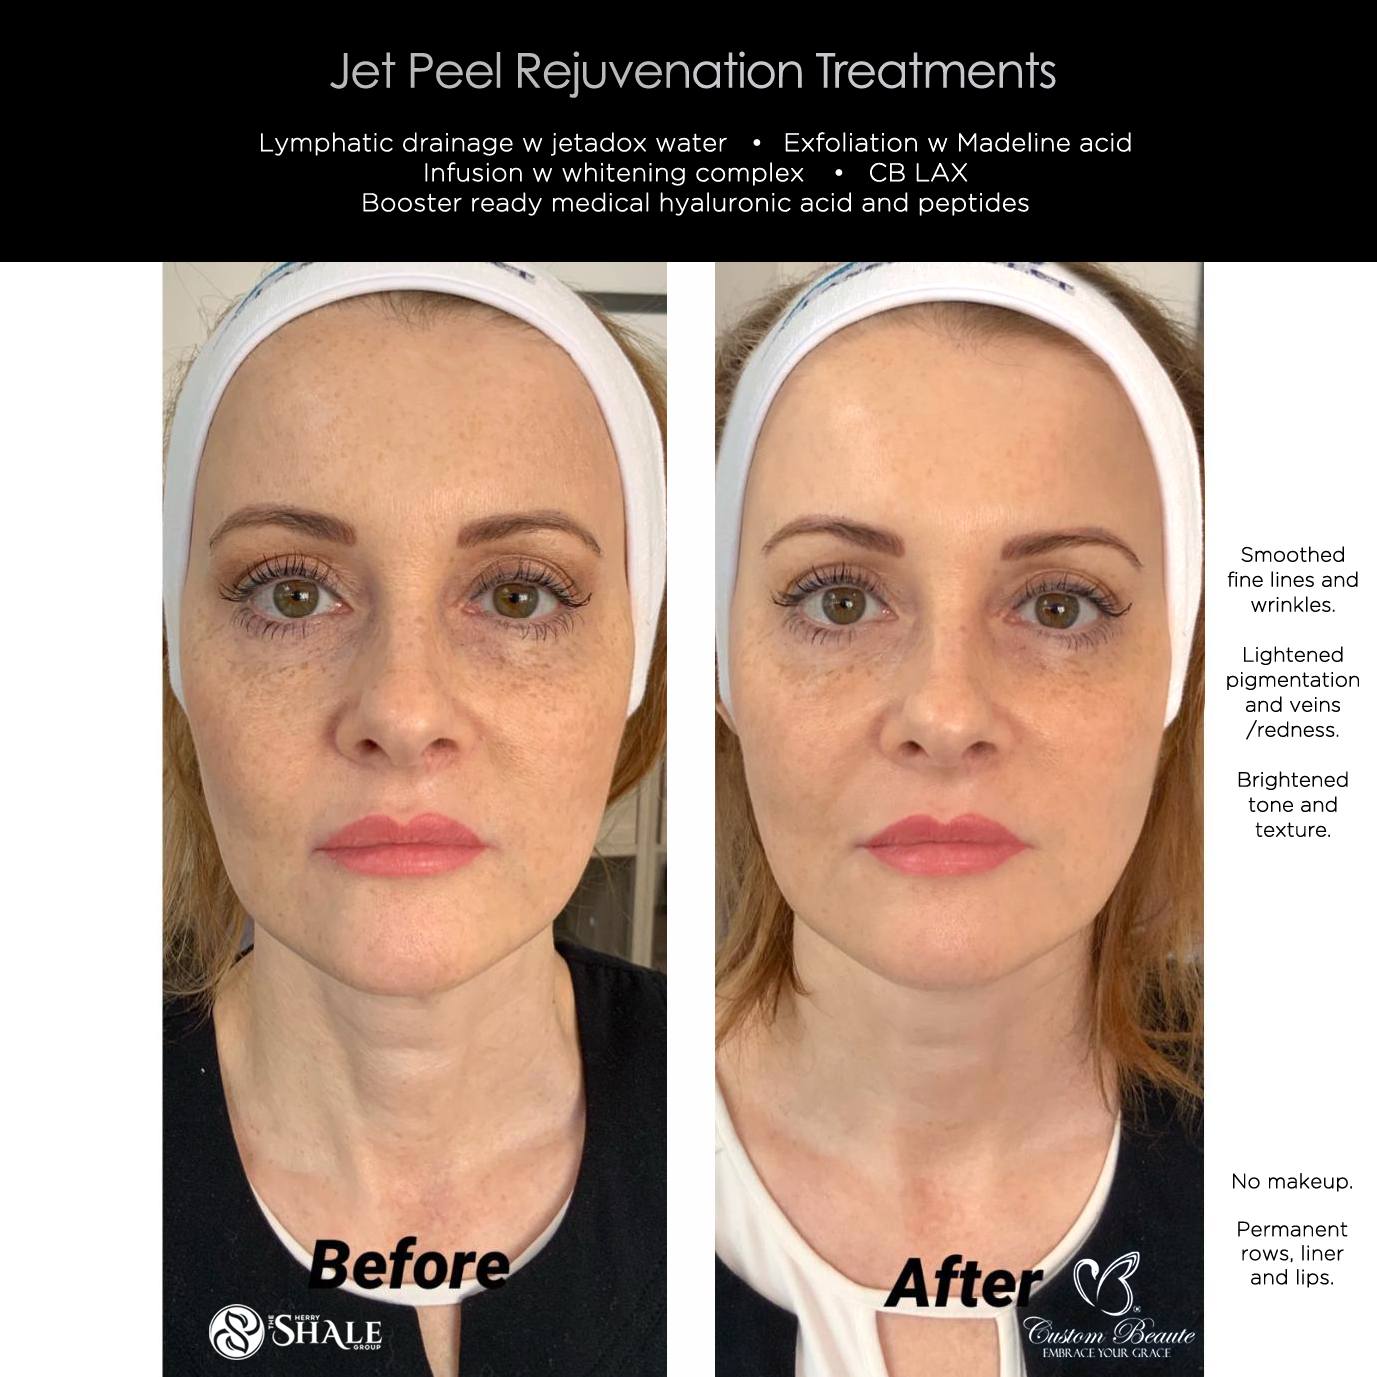 Before and After Jet Peel Rejuvenation Treatment in Amherst New York